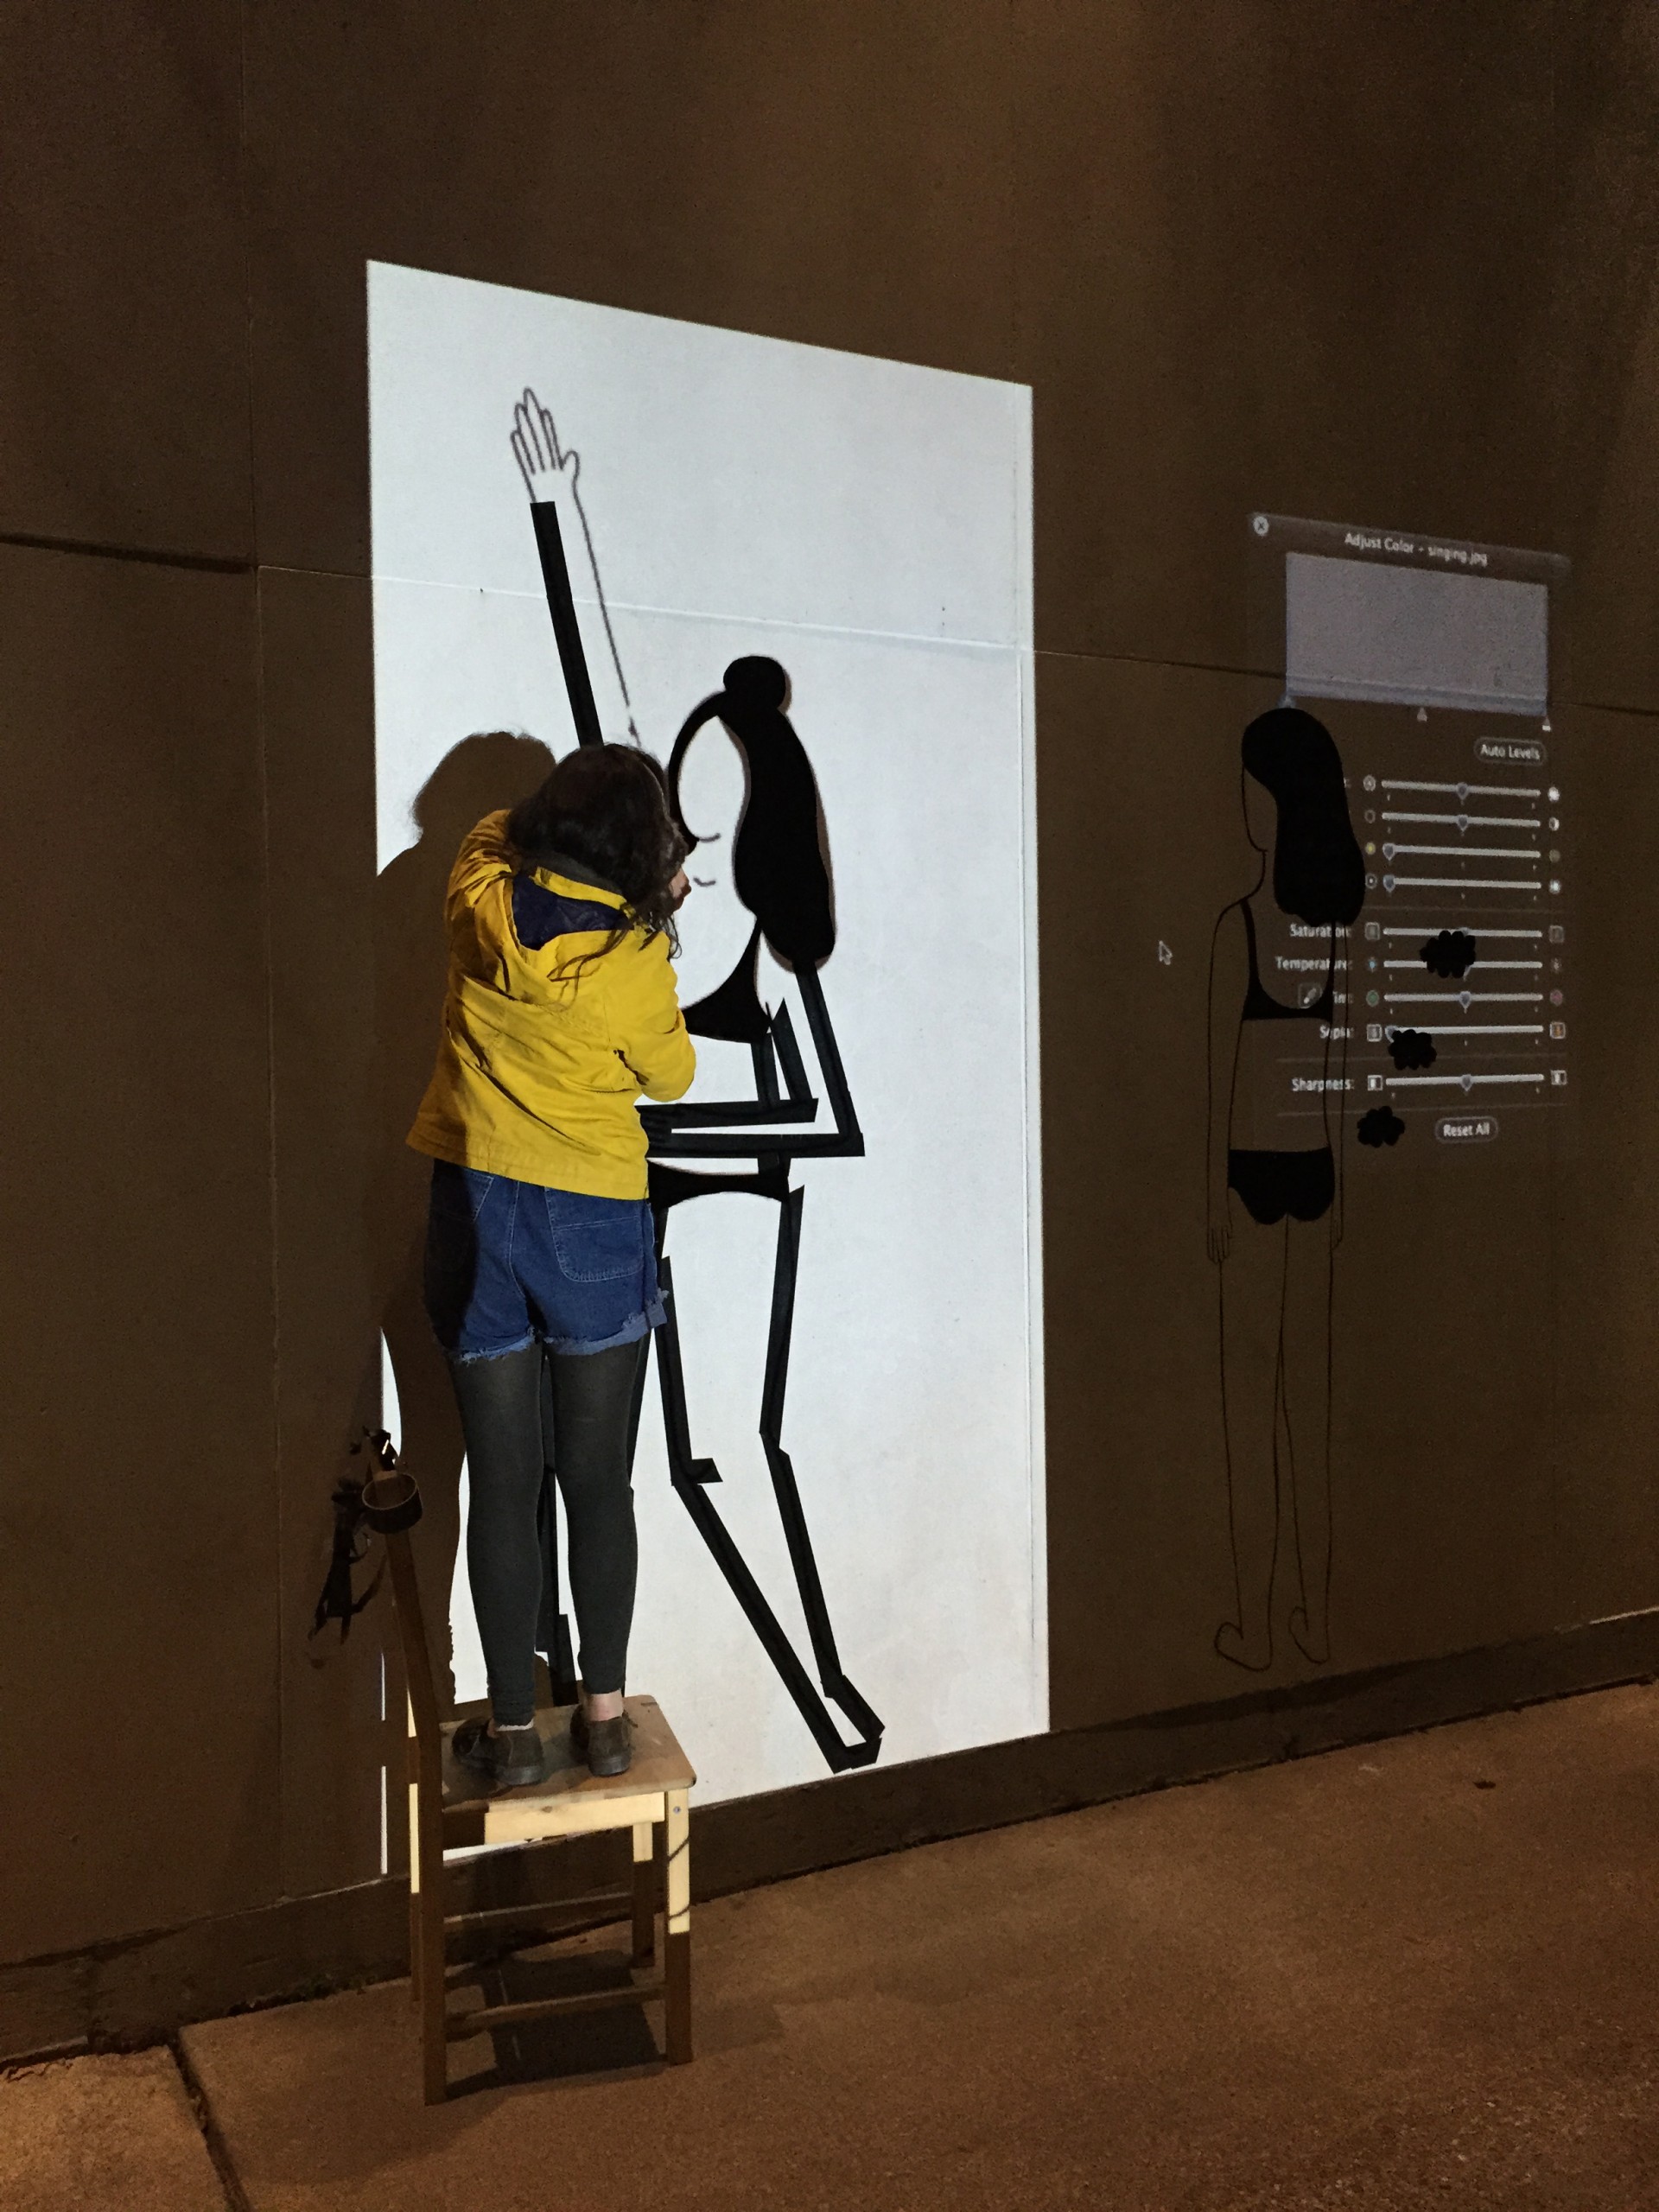 Image of artist making duct tape mural at night. She is standing on chair cast in light from projected image onto wall. 